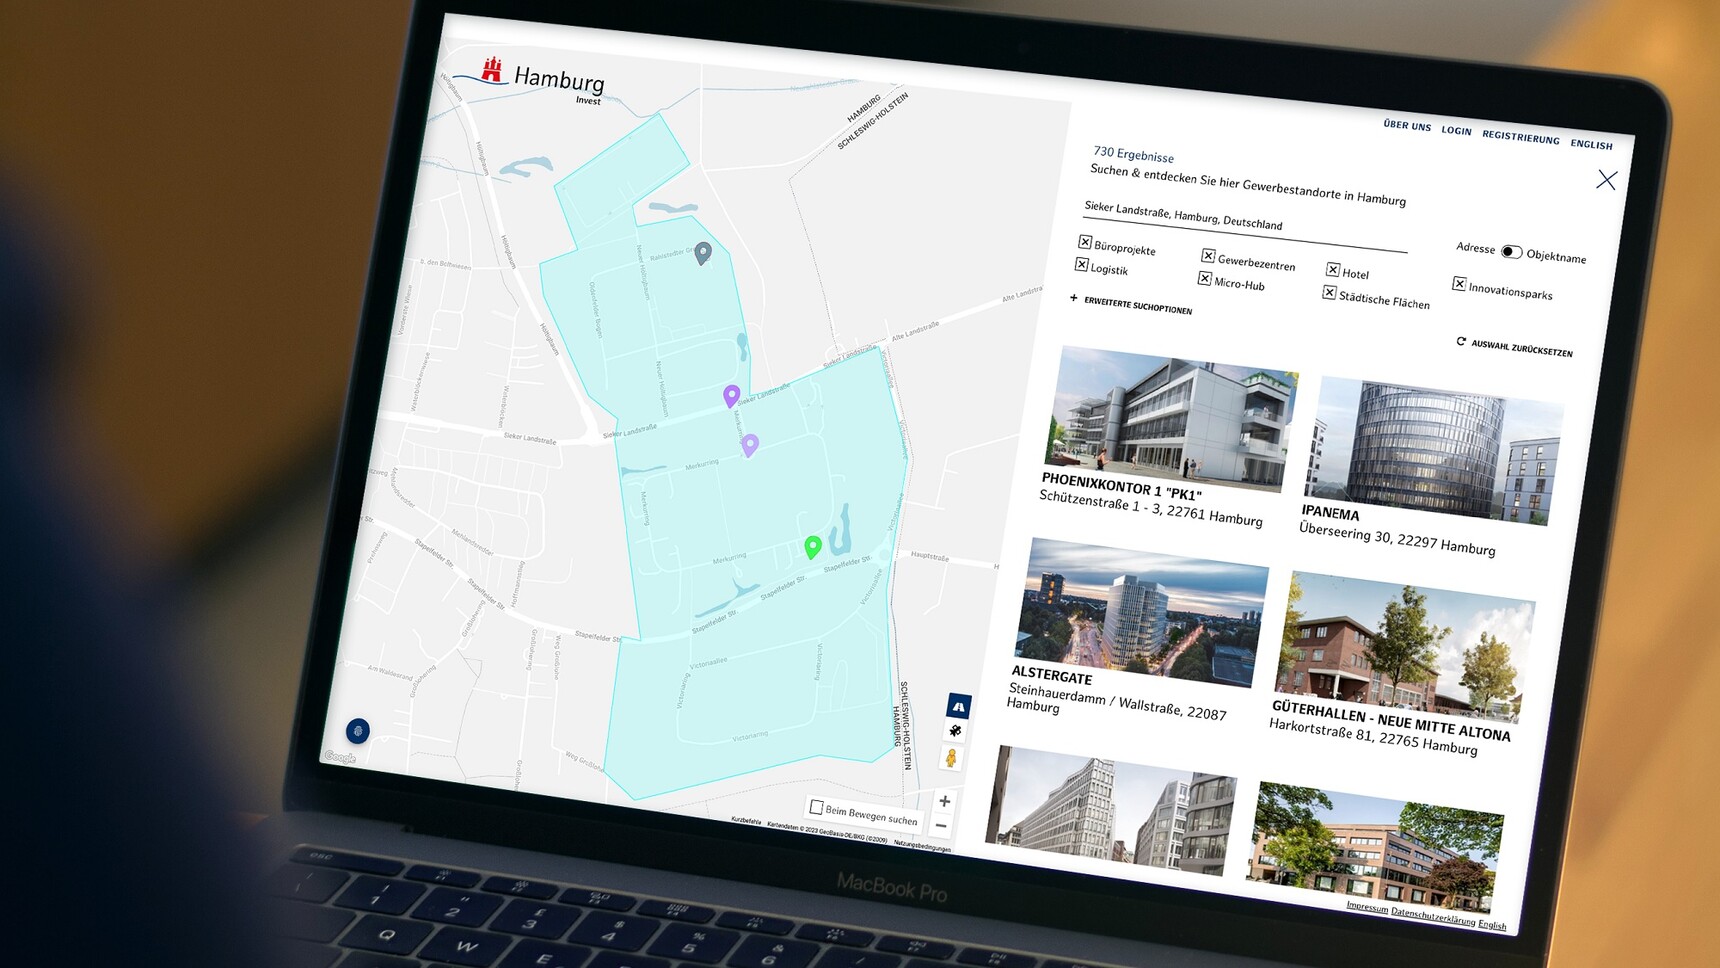 To the interactive map of the most important industrial locations in Hamburg